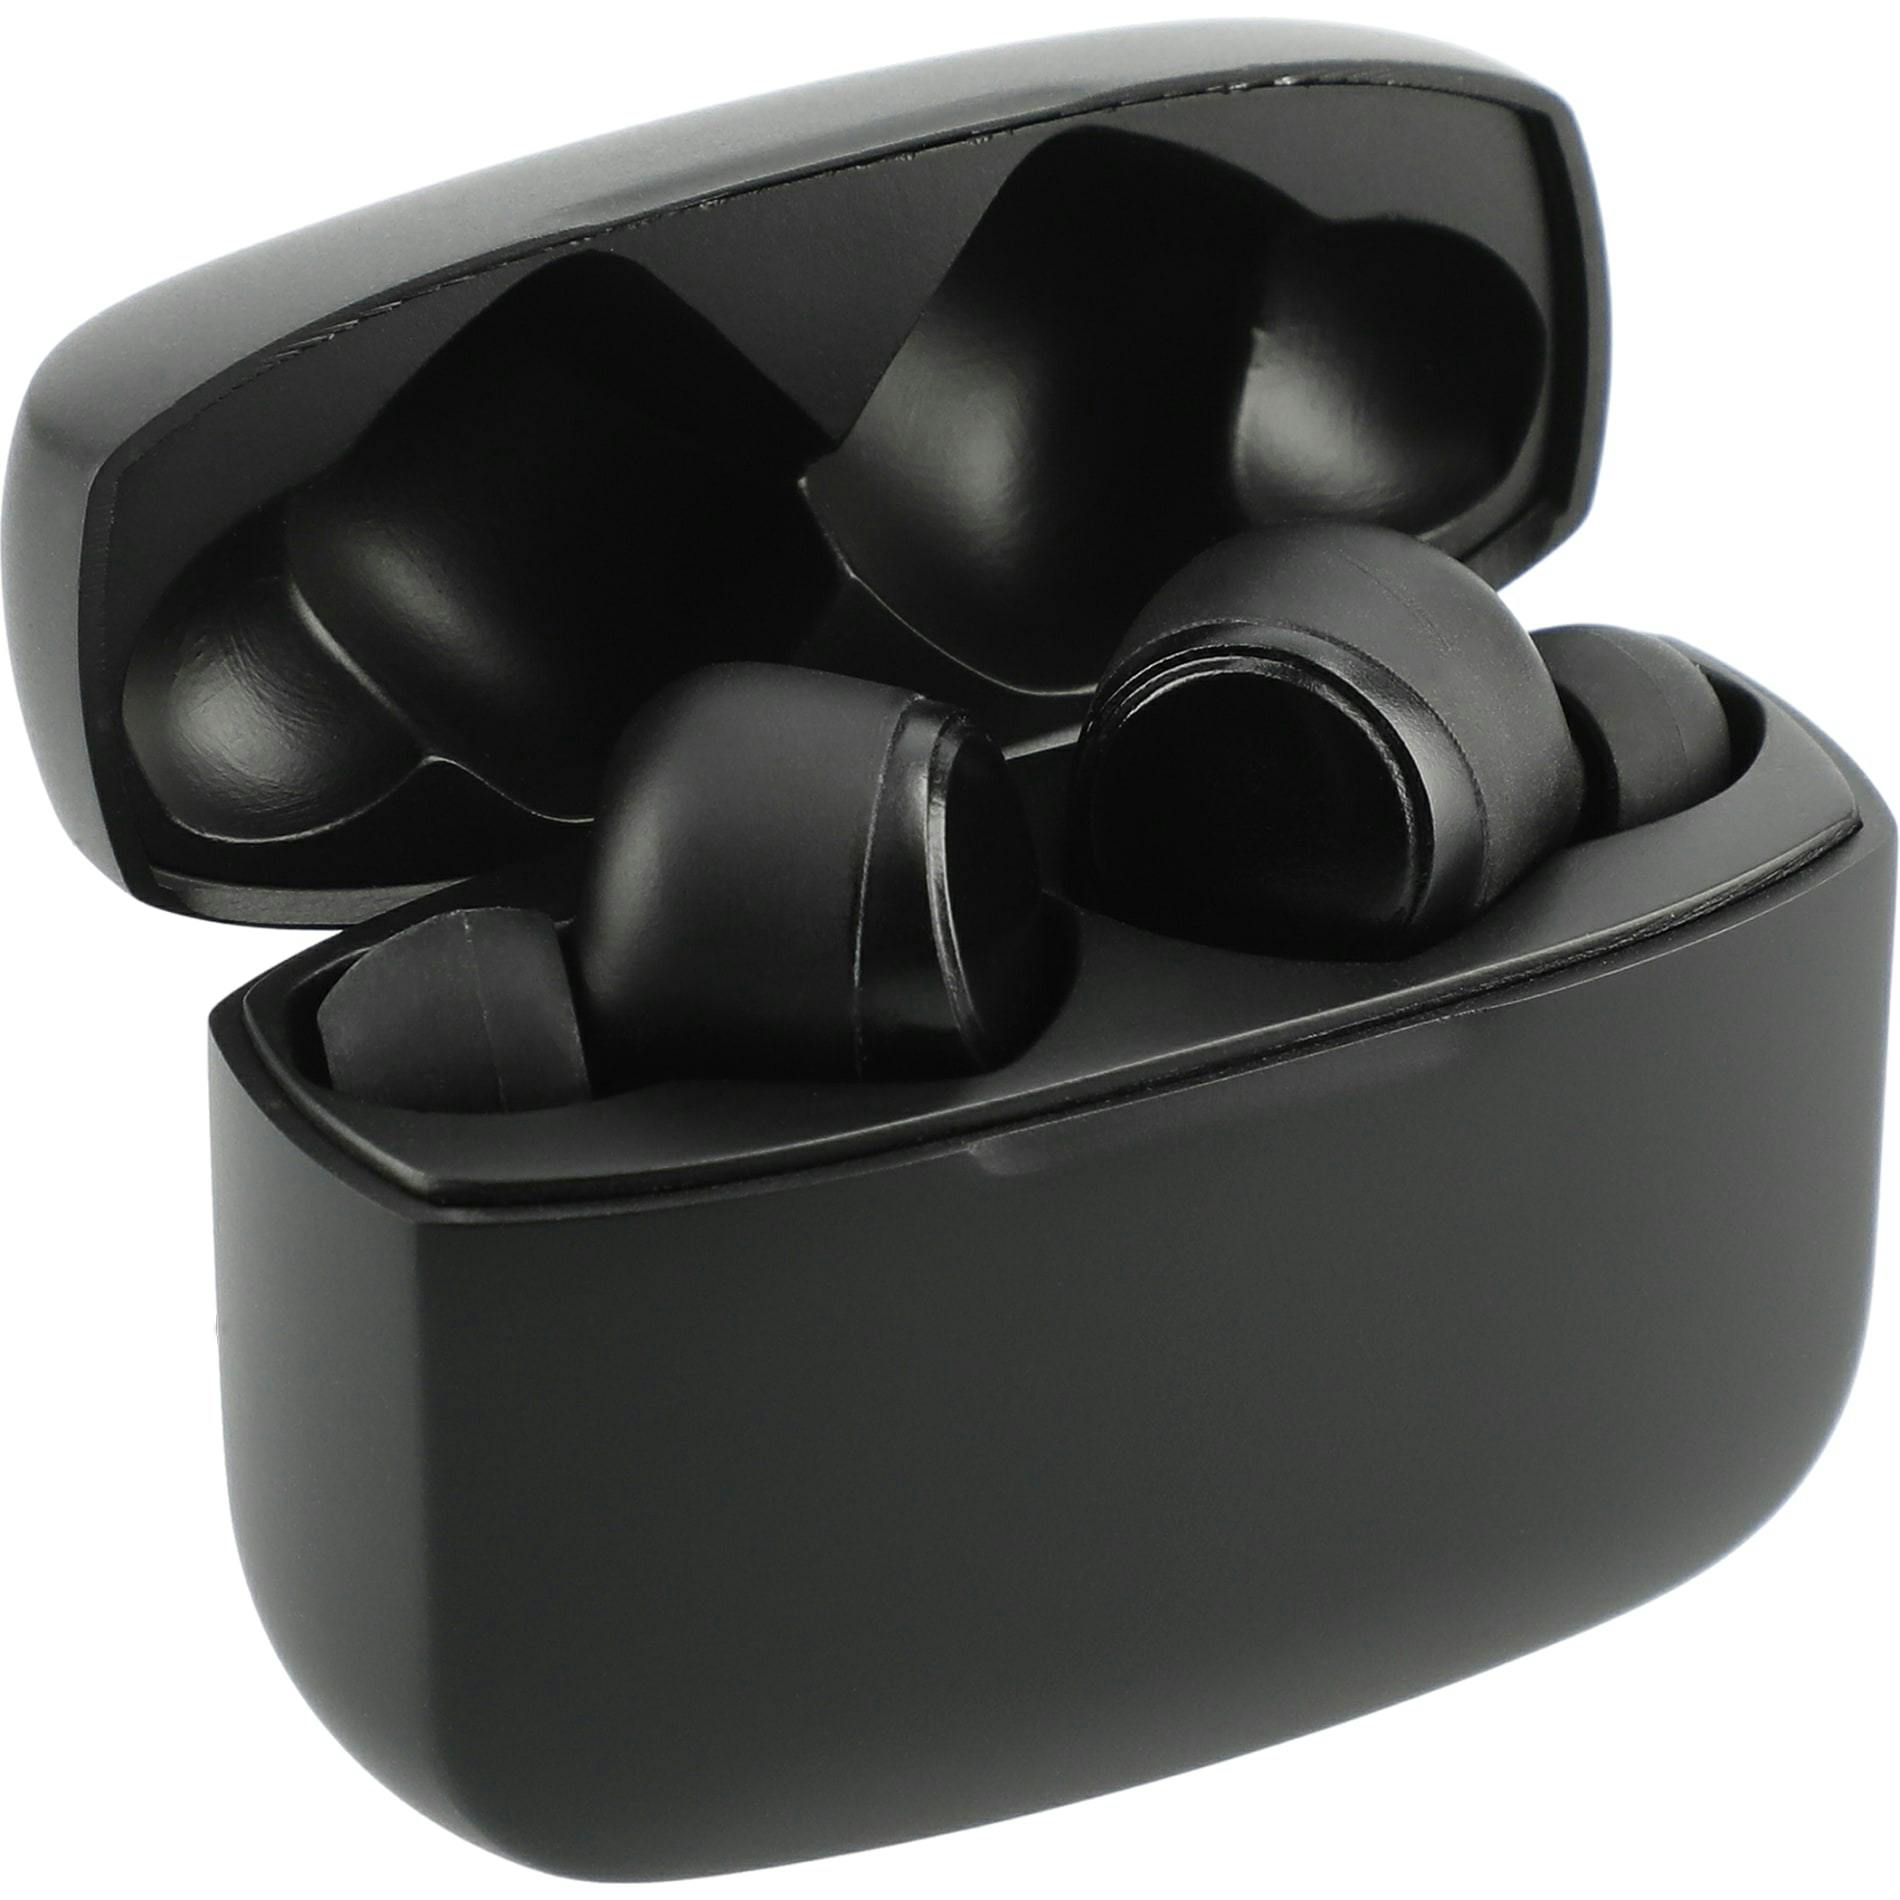 A'Ray True Wireless Auto Pair Earbuds with ANC. - additional Image 3